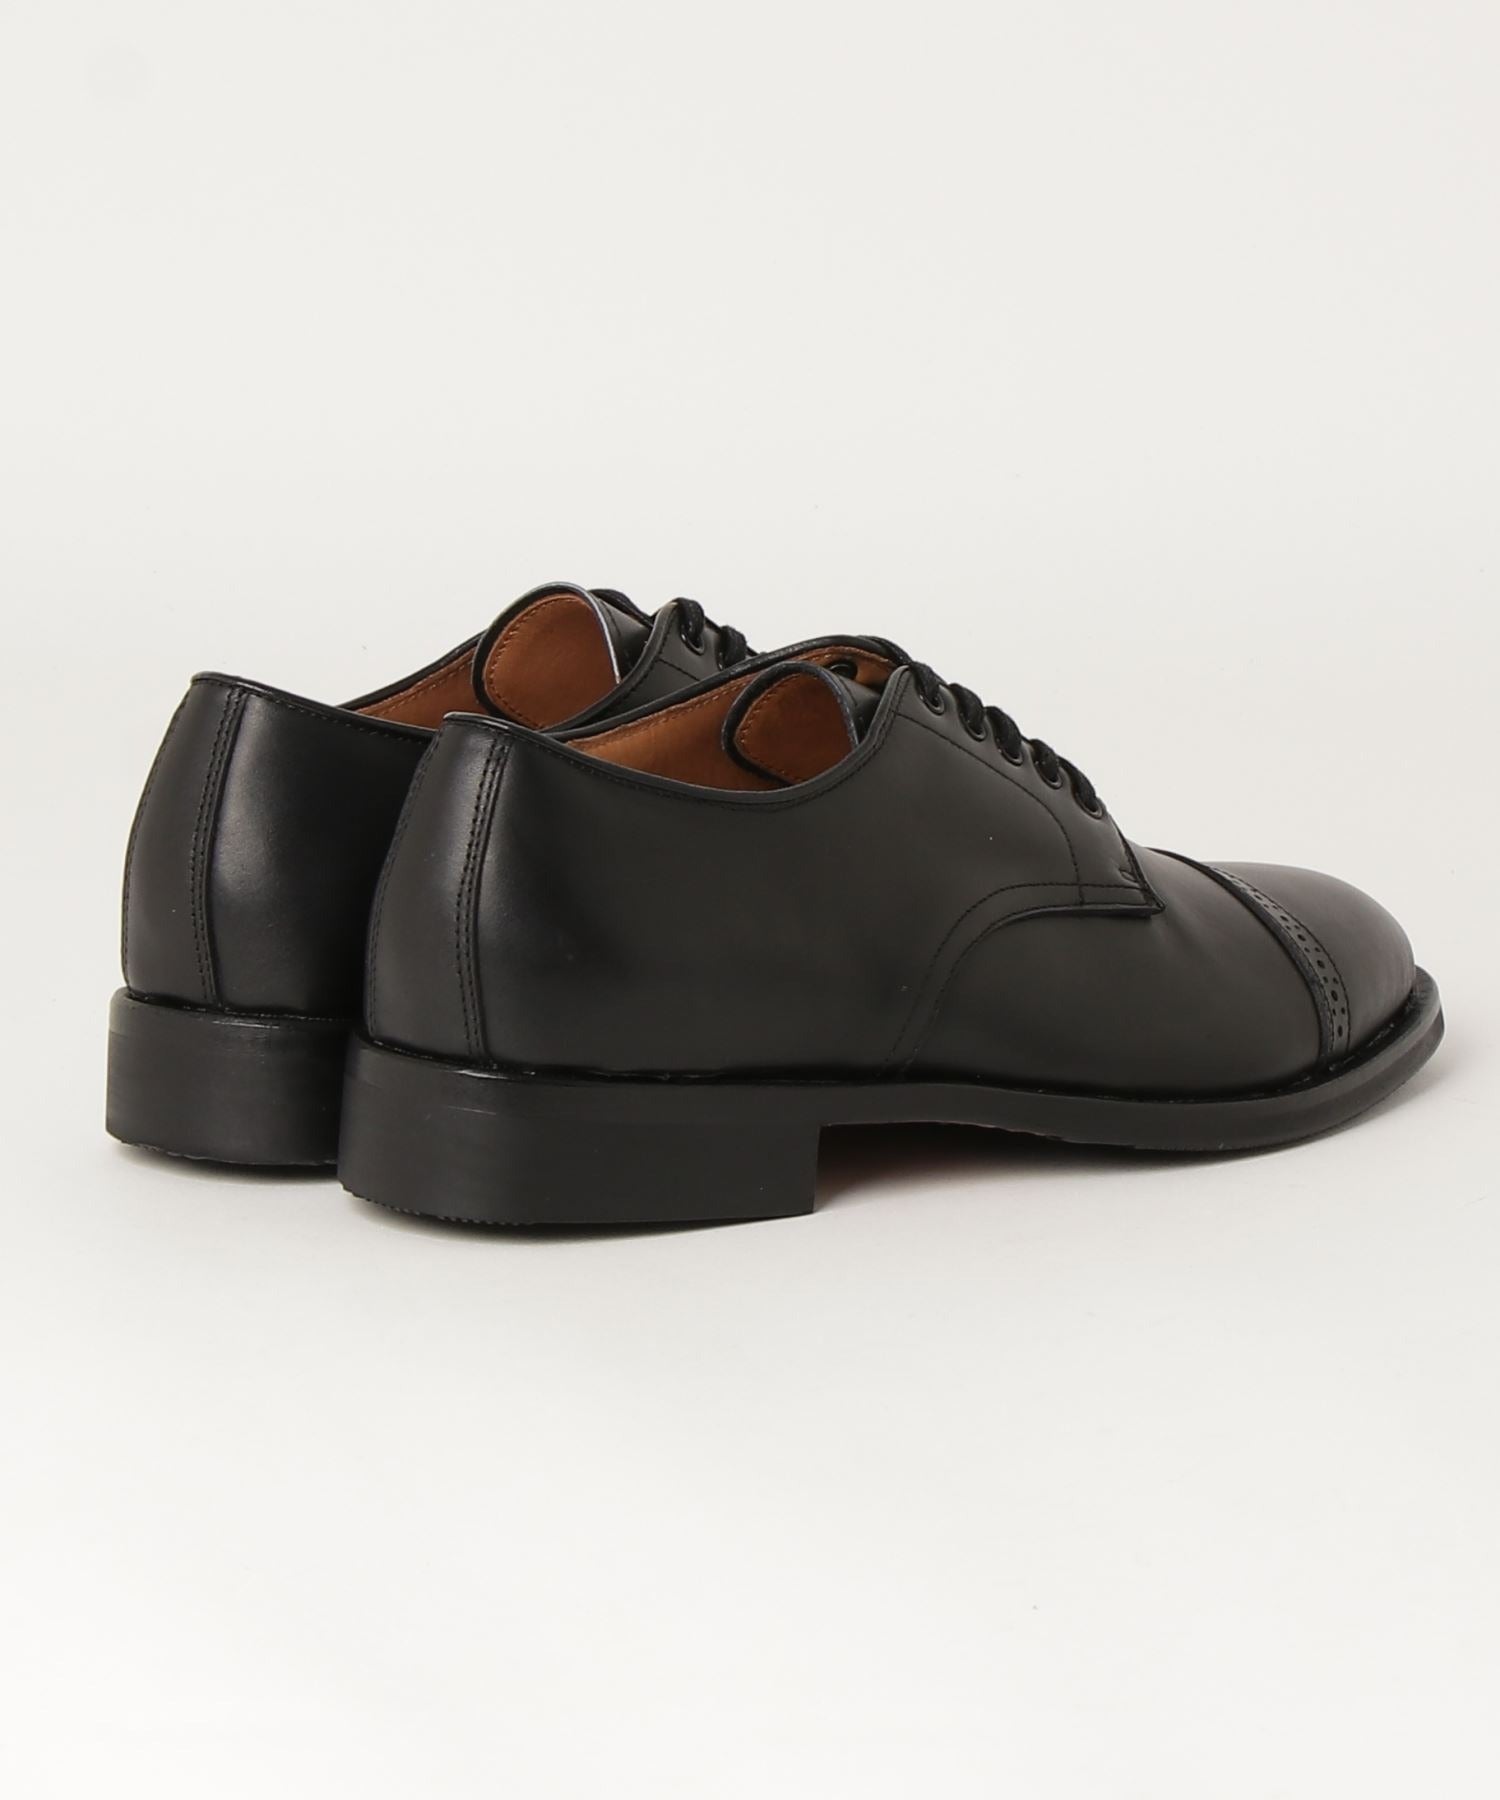 THE OXFORD DRESS SHOES